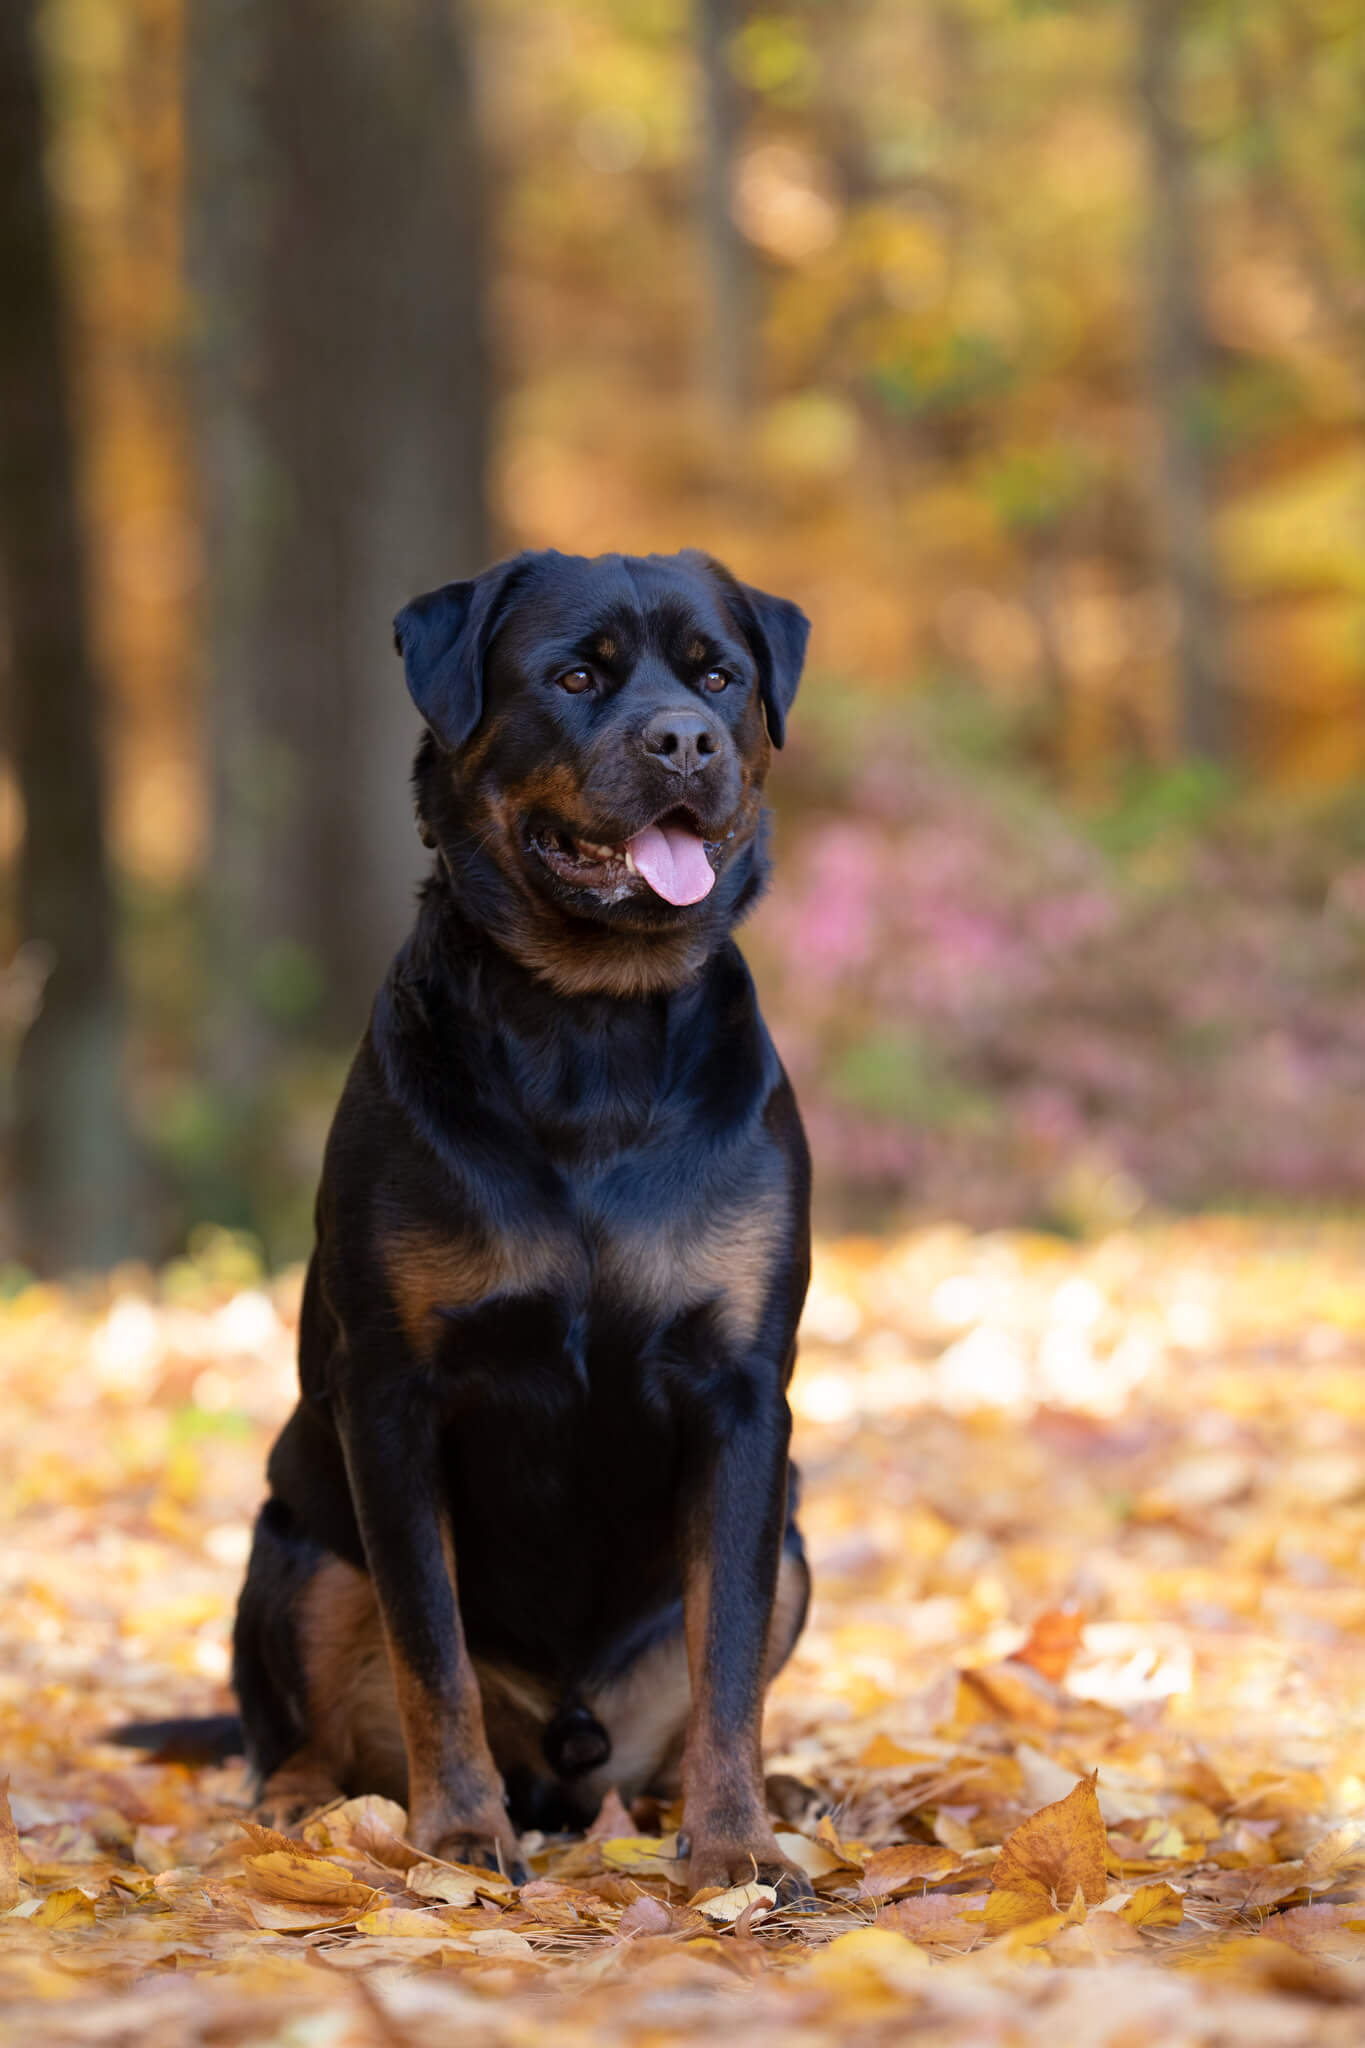 A Rottweiler sits in a forest surrounded by fallen leaves For the Love of Dog Rescue